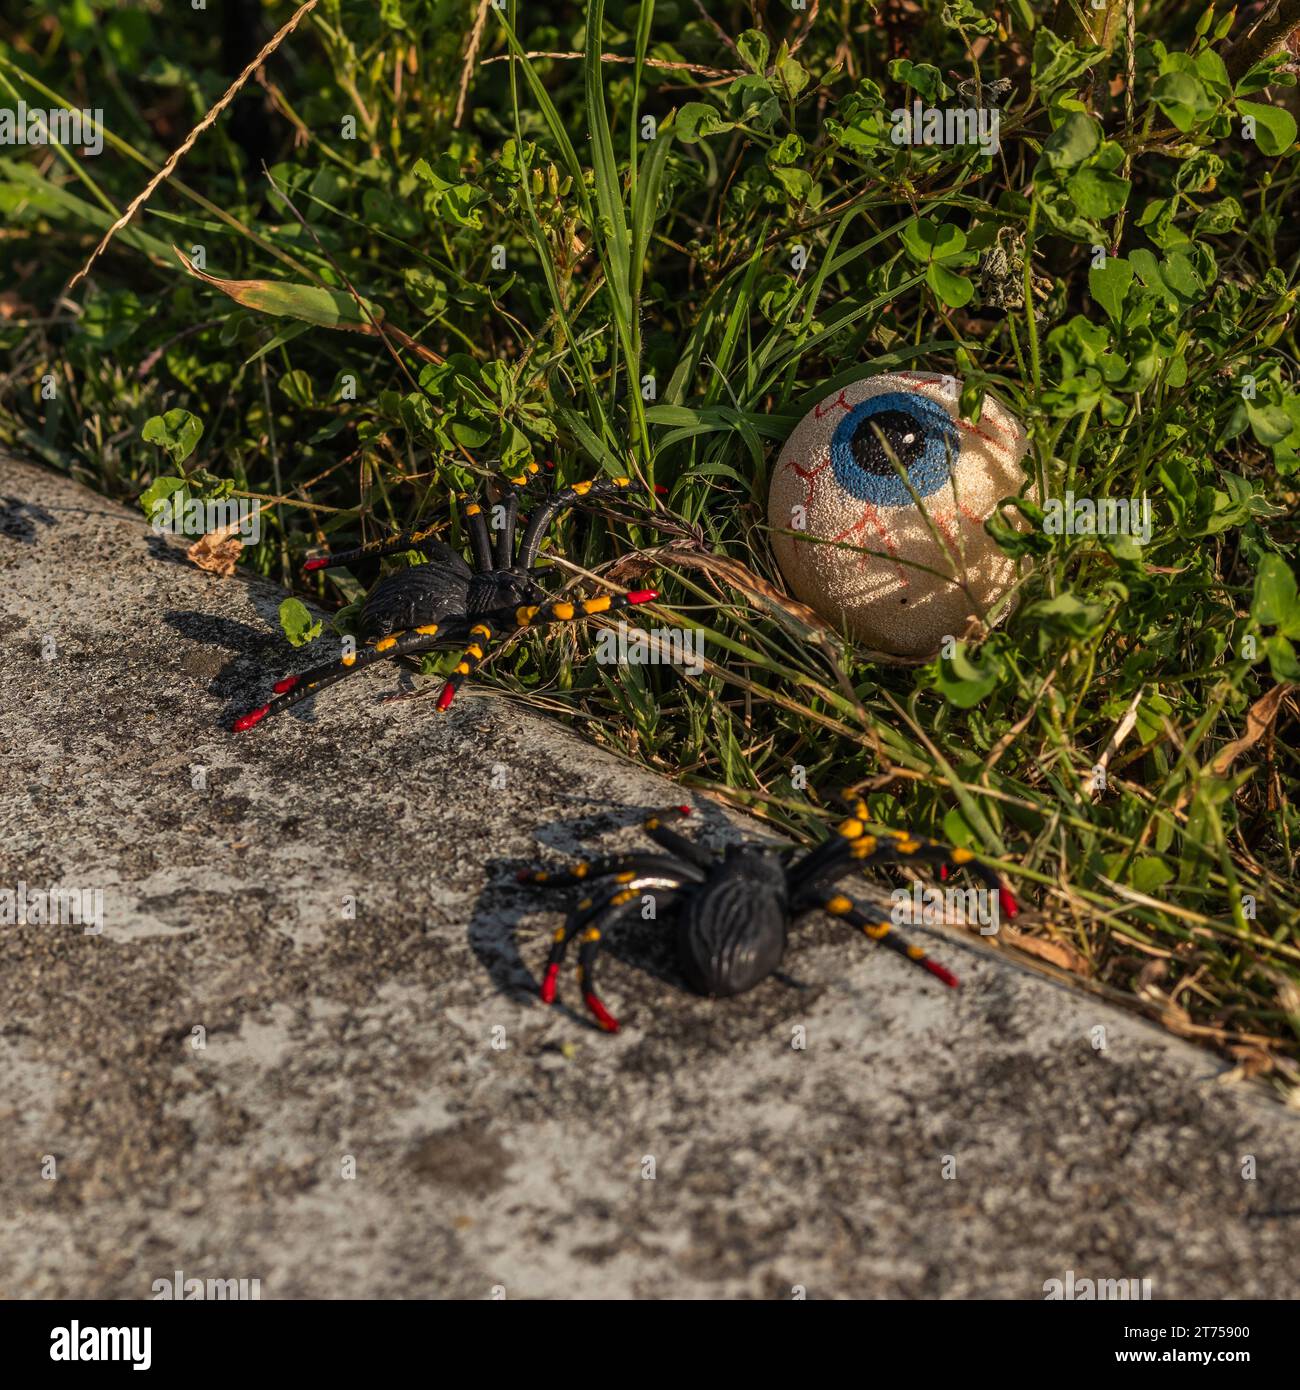 Eerie garden decor featuring a fake eye and two faux spiders, setting the stage for a Halloween fright fest Stock Photo